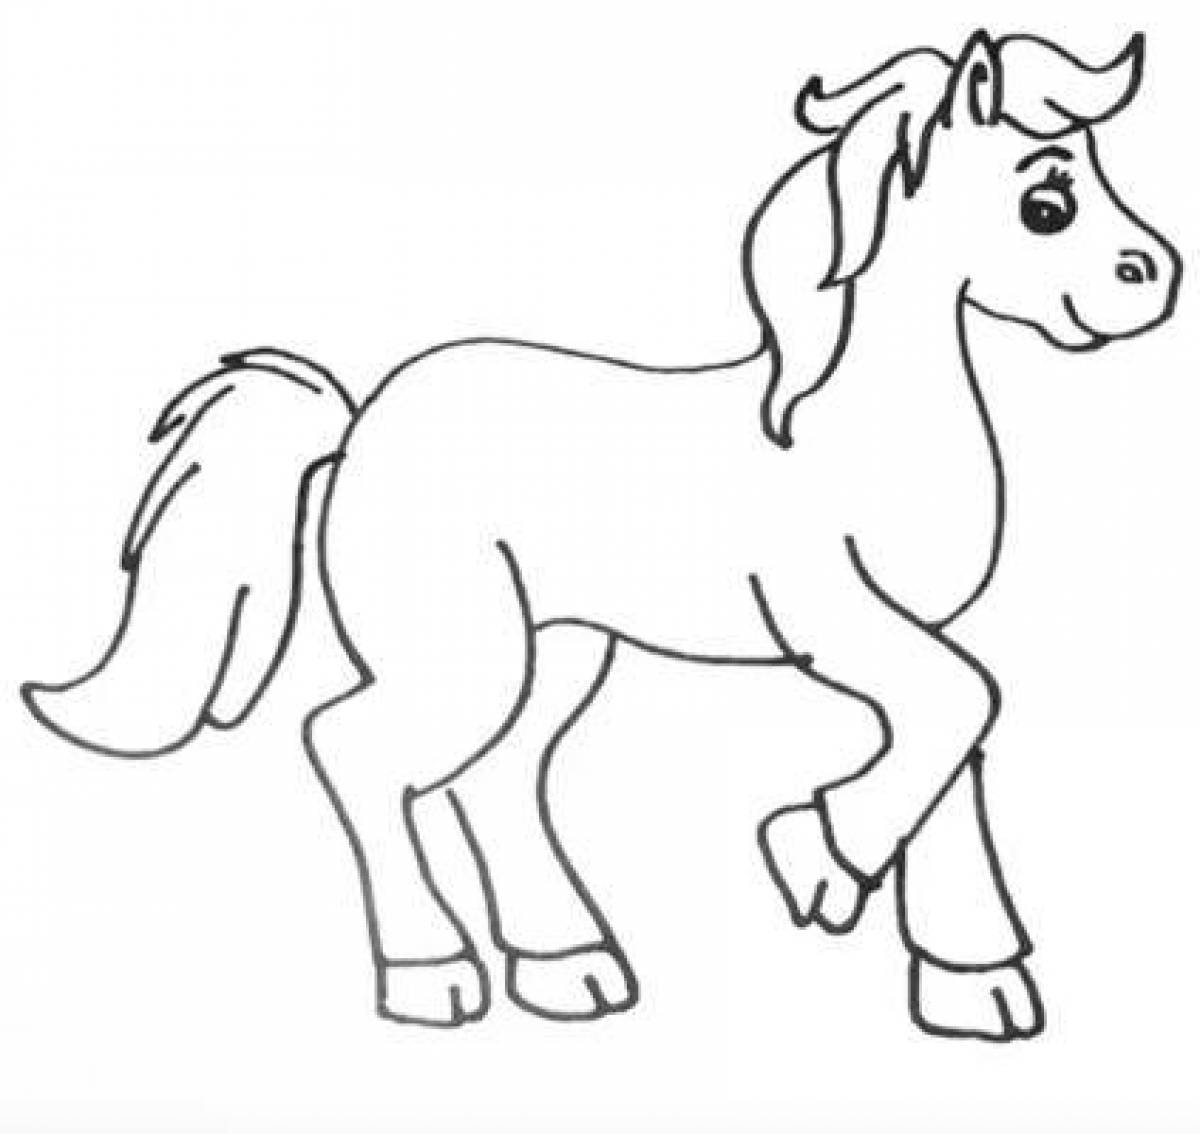 Humpbacked Horse Coloring Page